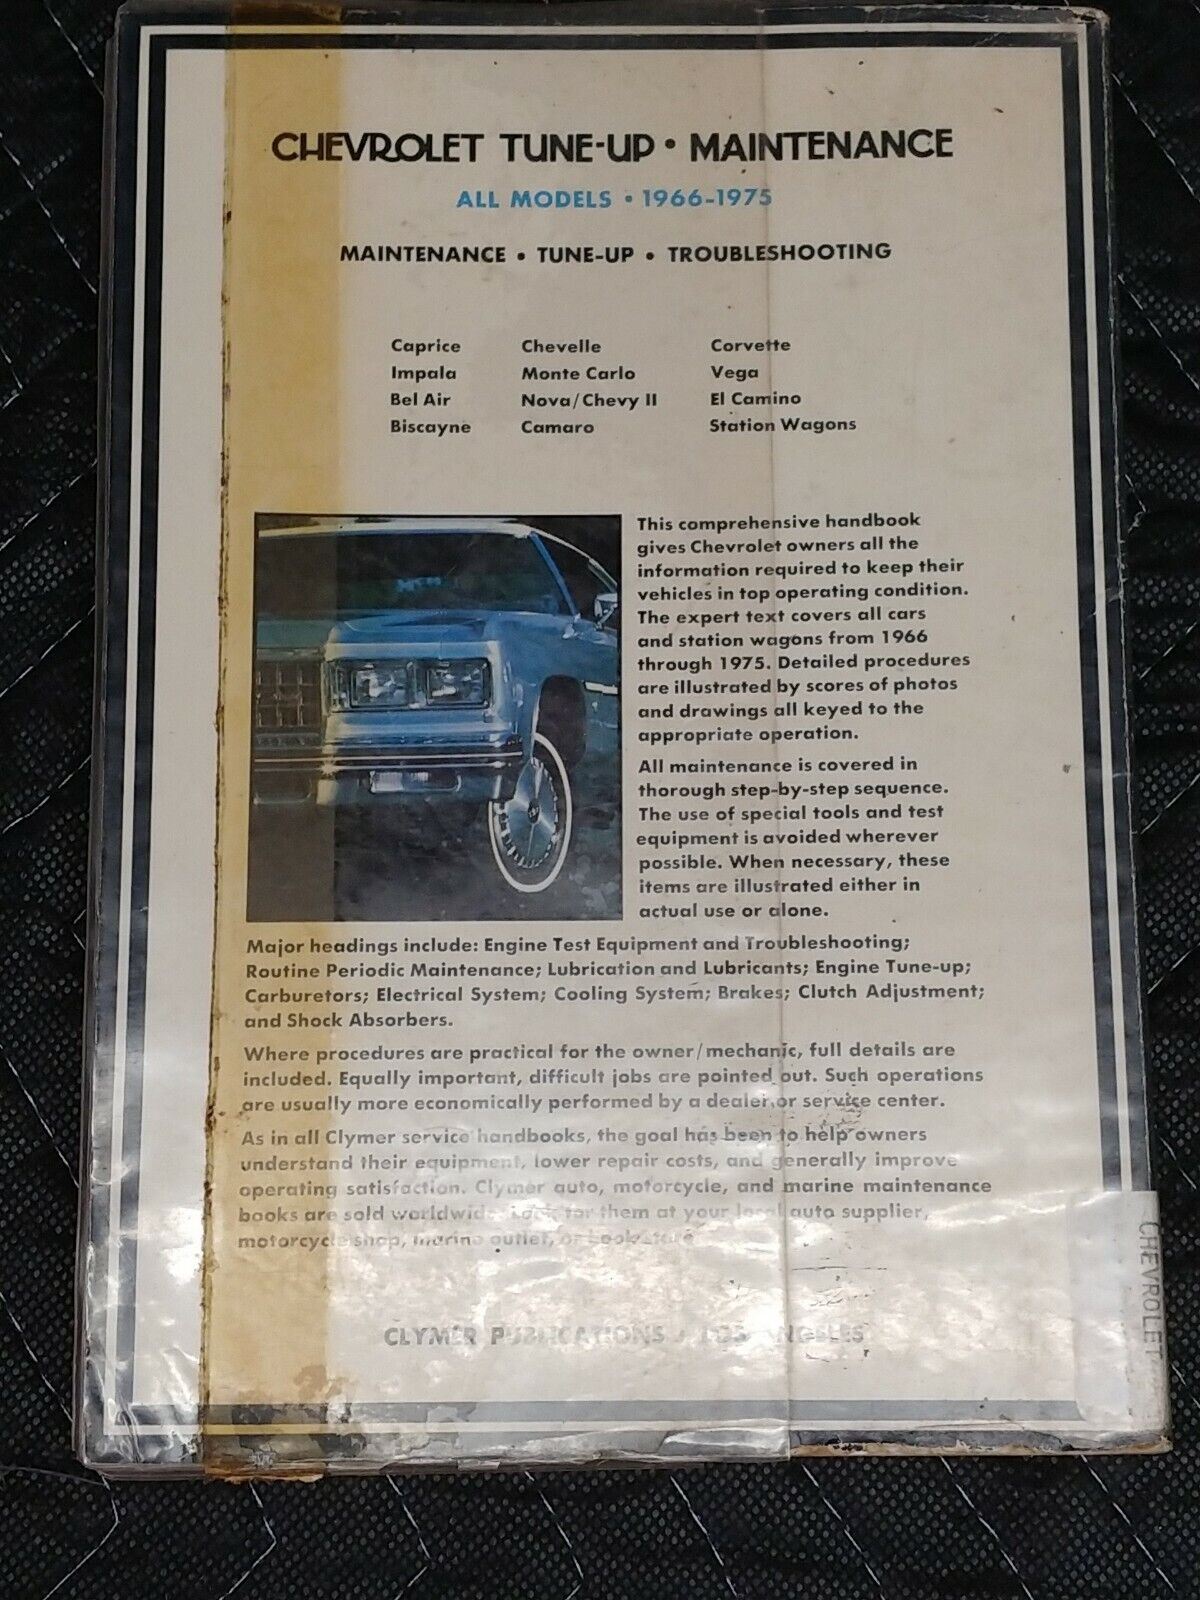 Chevrolet tune-up, maintenance: All models, 1966-1975, , Combs Jim, 1976